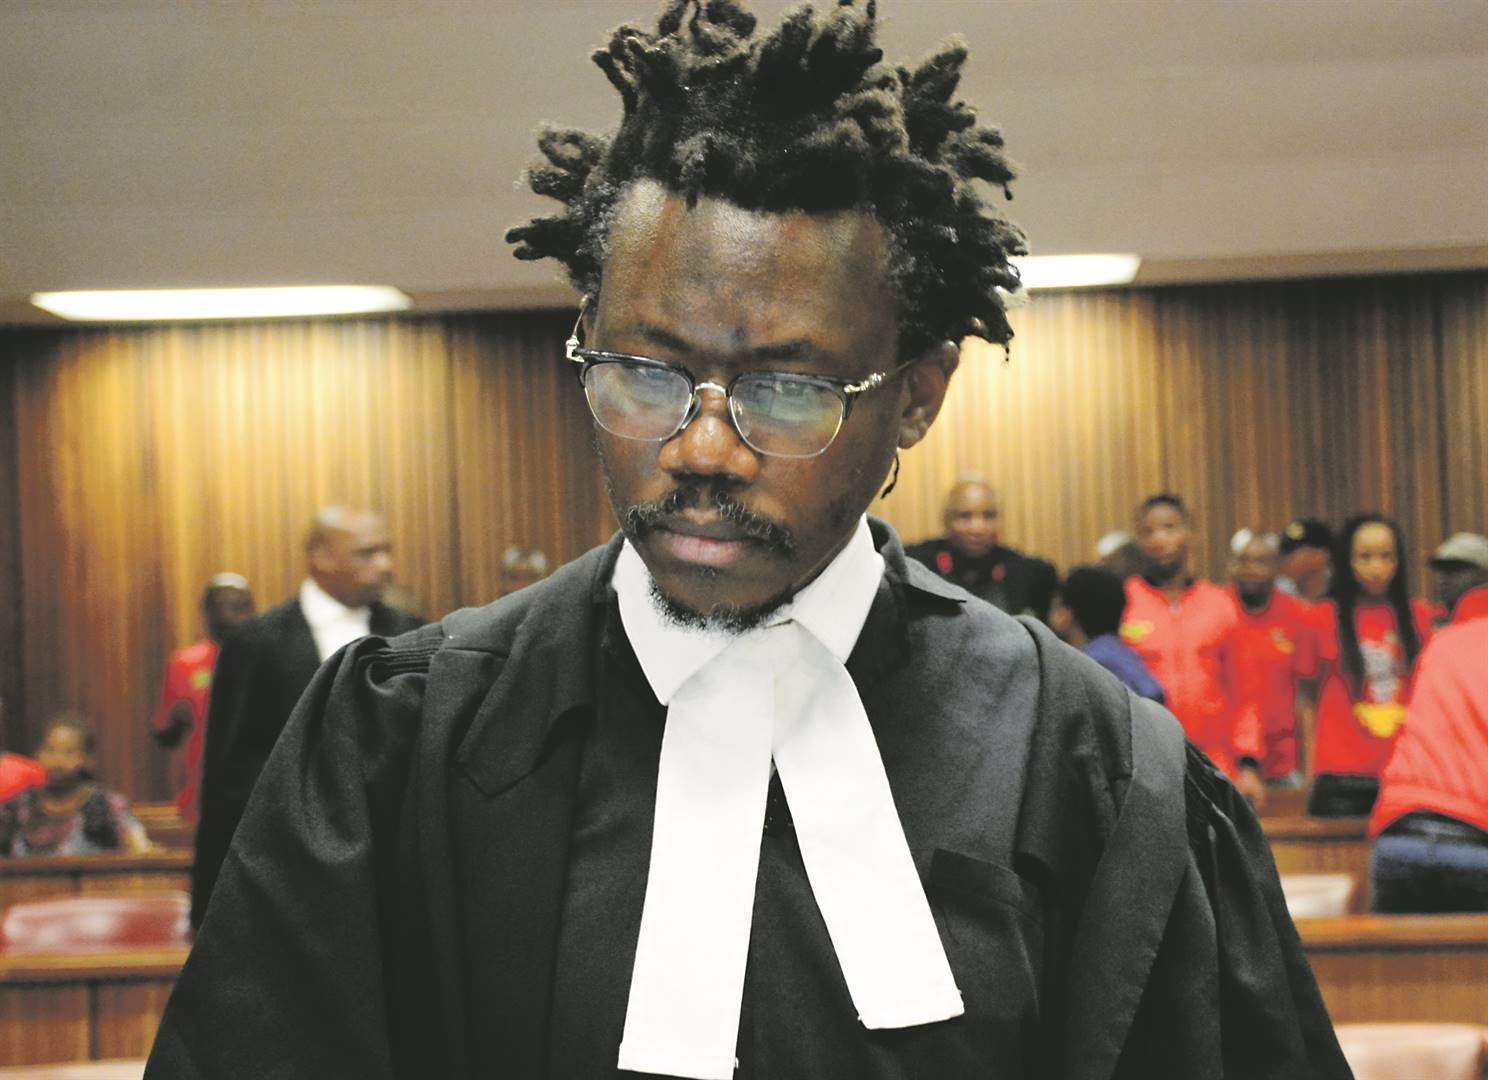 The Land is Ours by Tembeka Ngcukaitobi